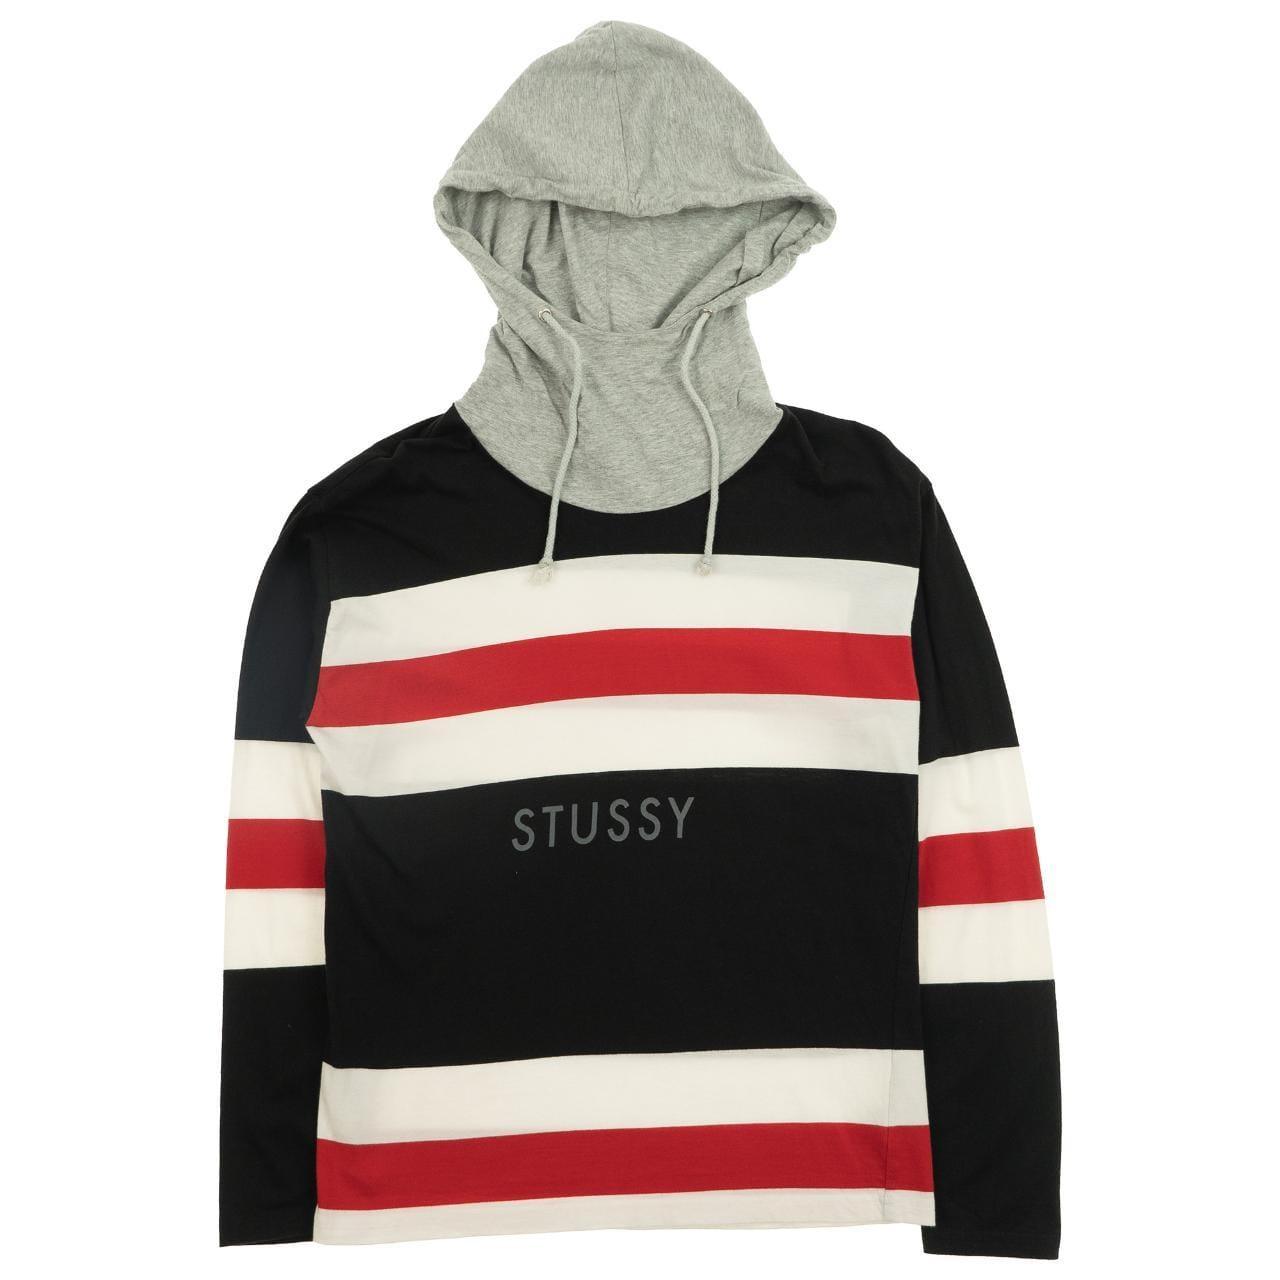 Vintage Stussy Striped Hoodie Woman’s Size S - Known Source